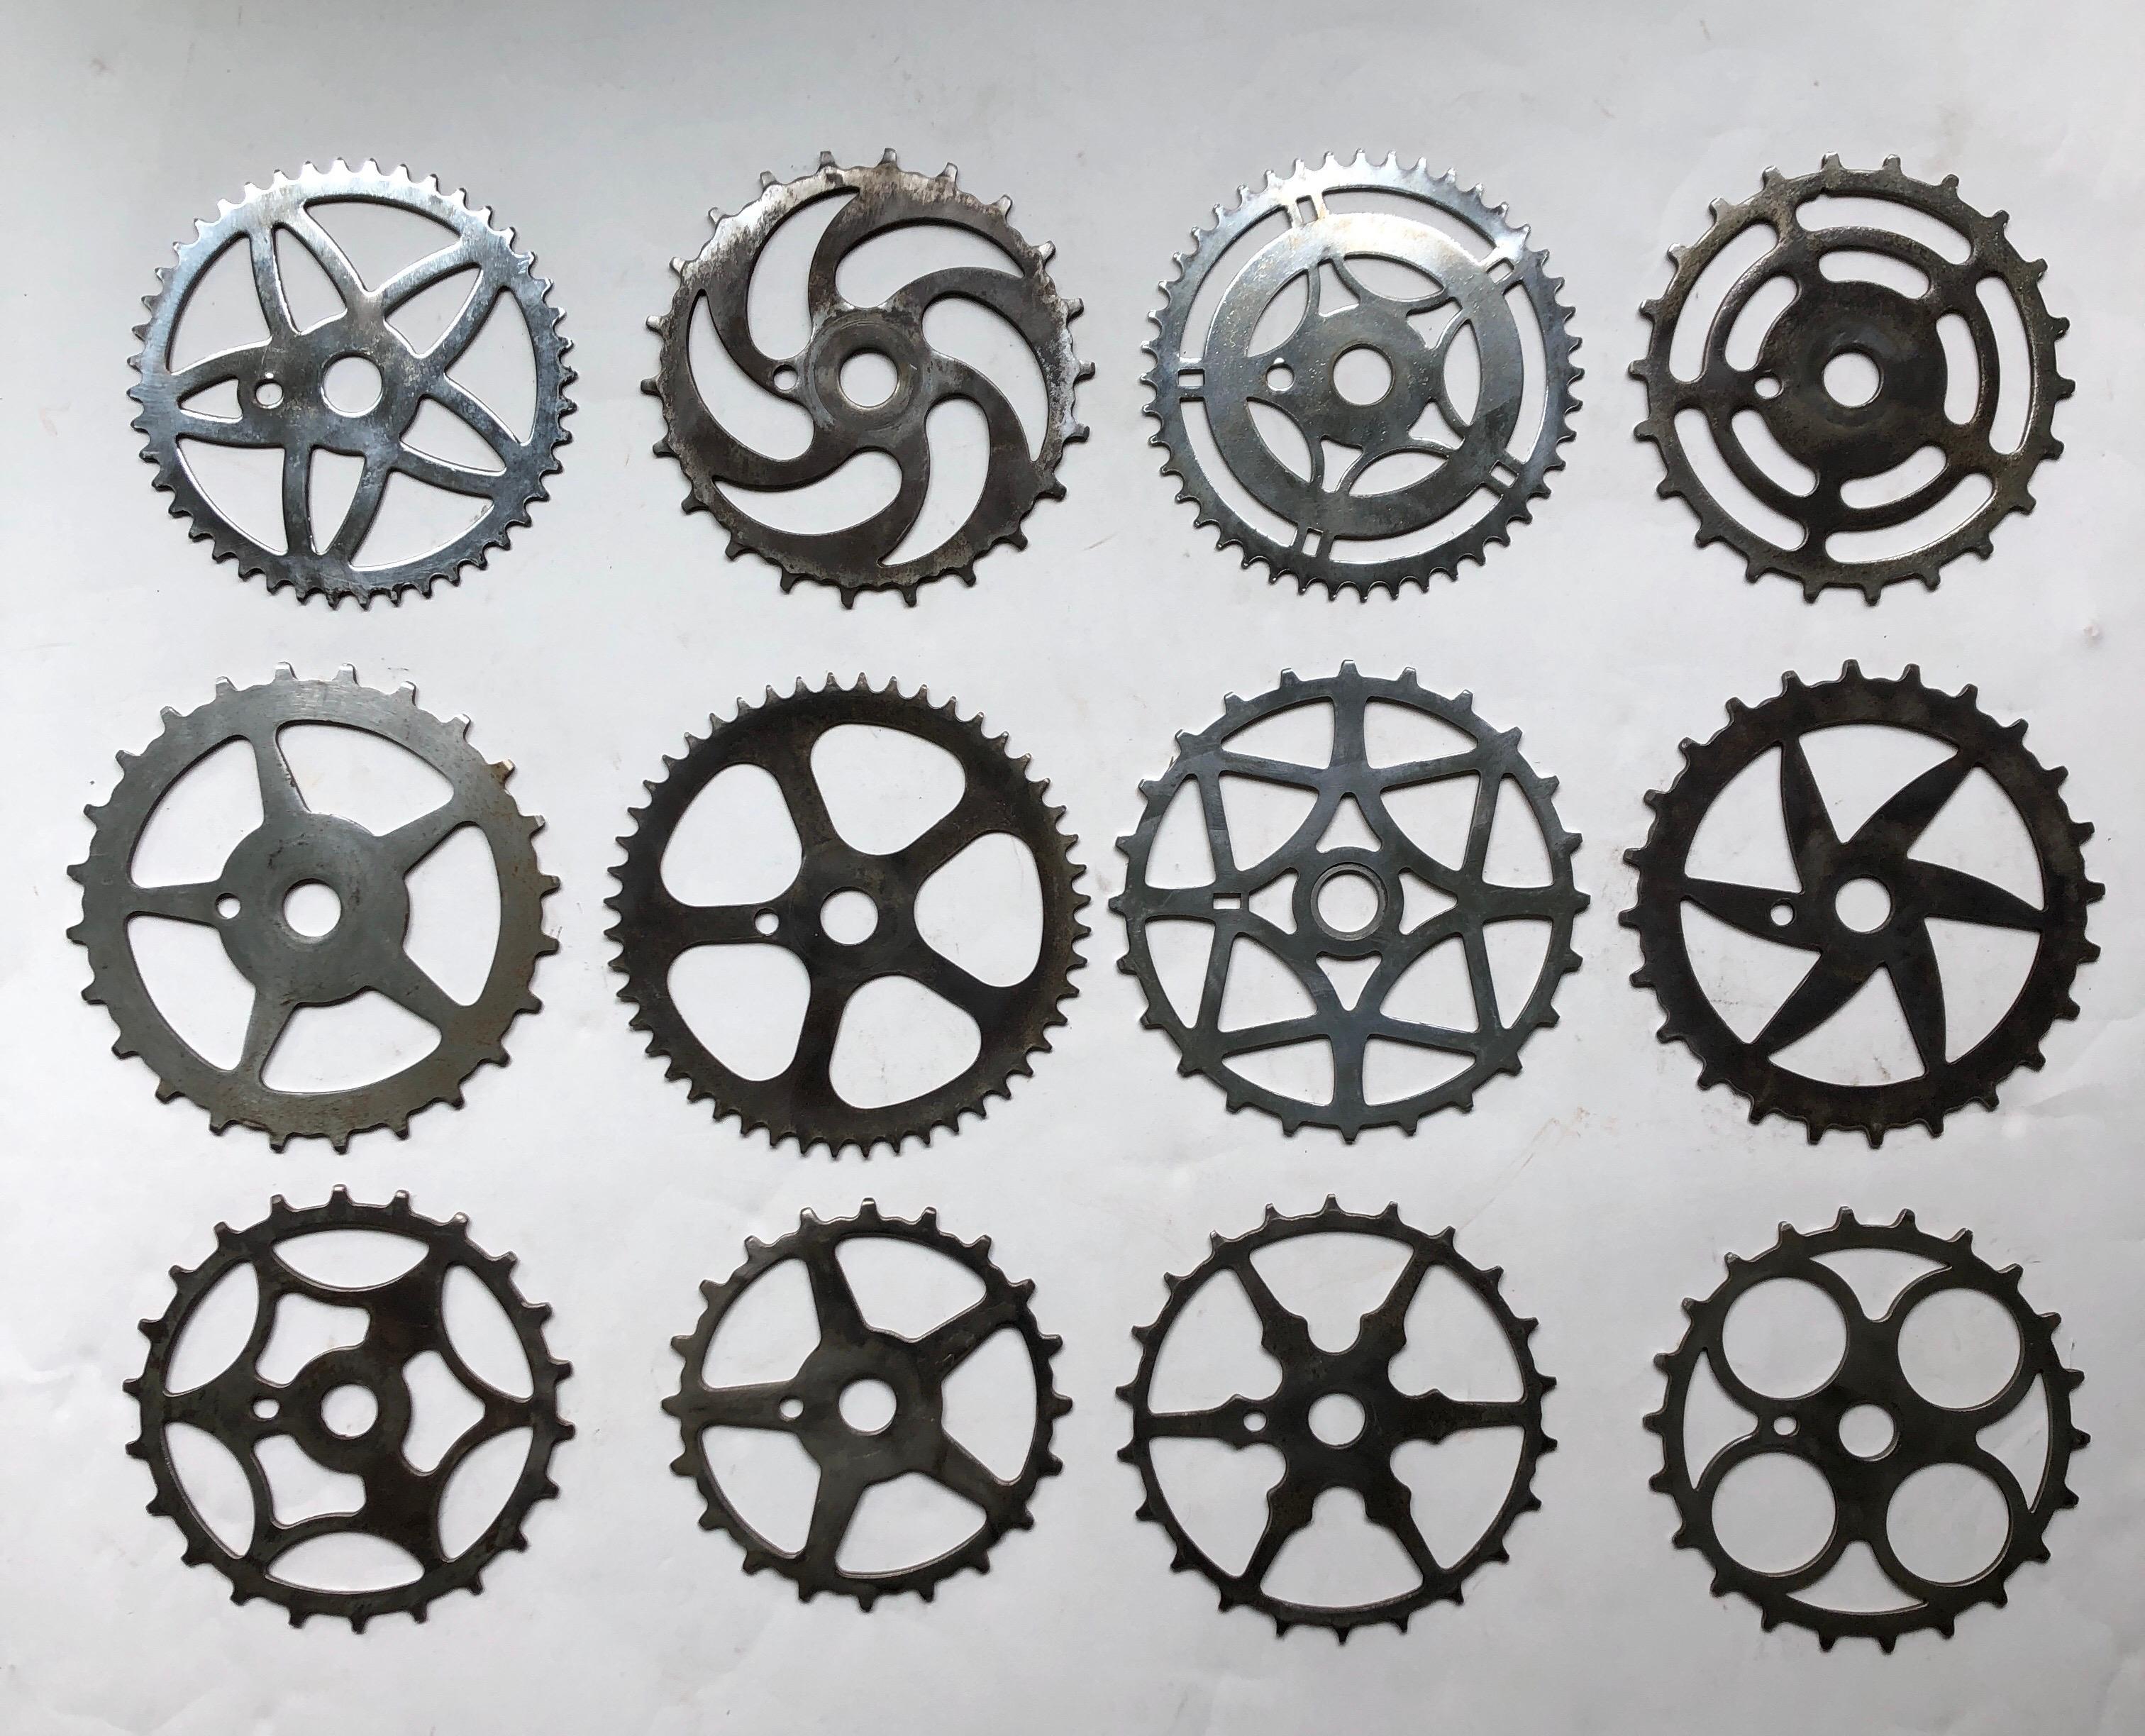 A collection of 12 antique and vintage chrome-plated steel bicycle sprockets. Chrome plating shows varying degrees of ware. Great display in multiple combinations. This collection ranges in diameter from 6.5